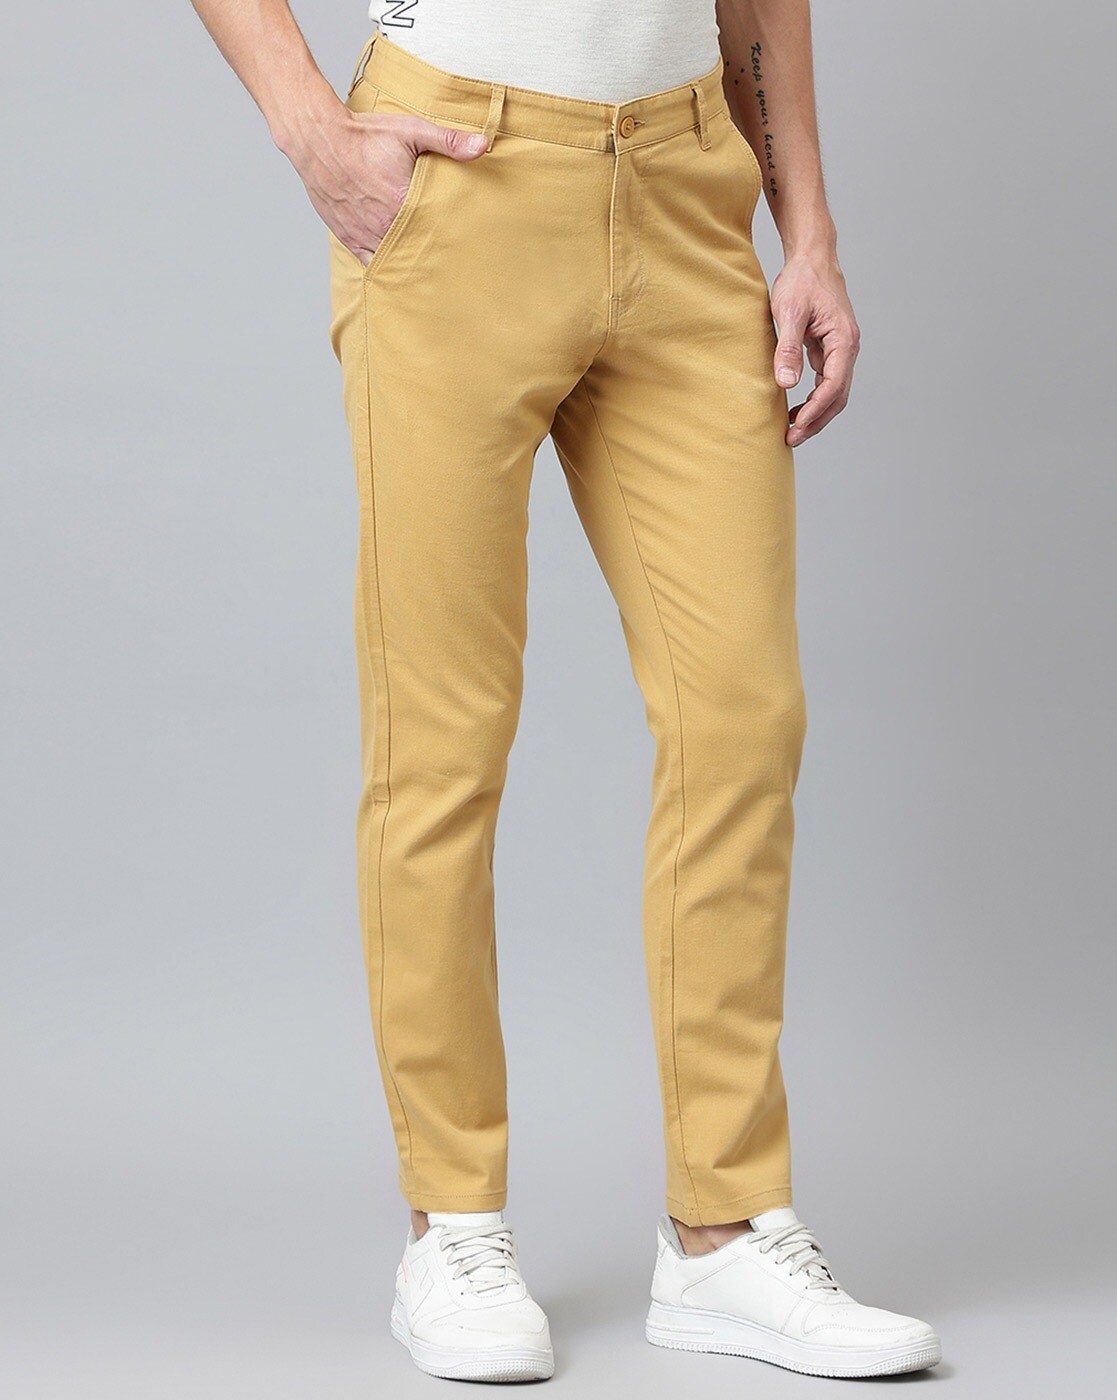 RARE RABBIT MENS LYTE PASTEL YELLOW TROUSER EXCEL COTTON FABRIC BUTTO